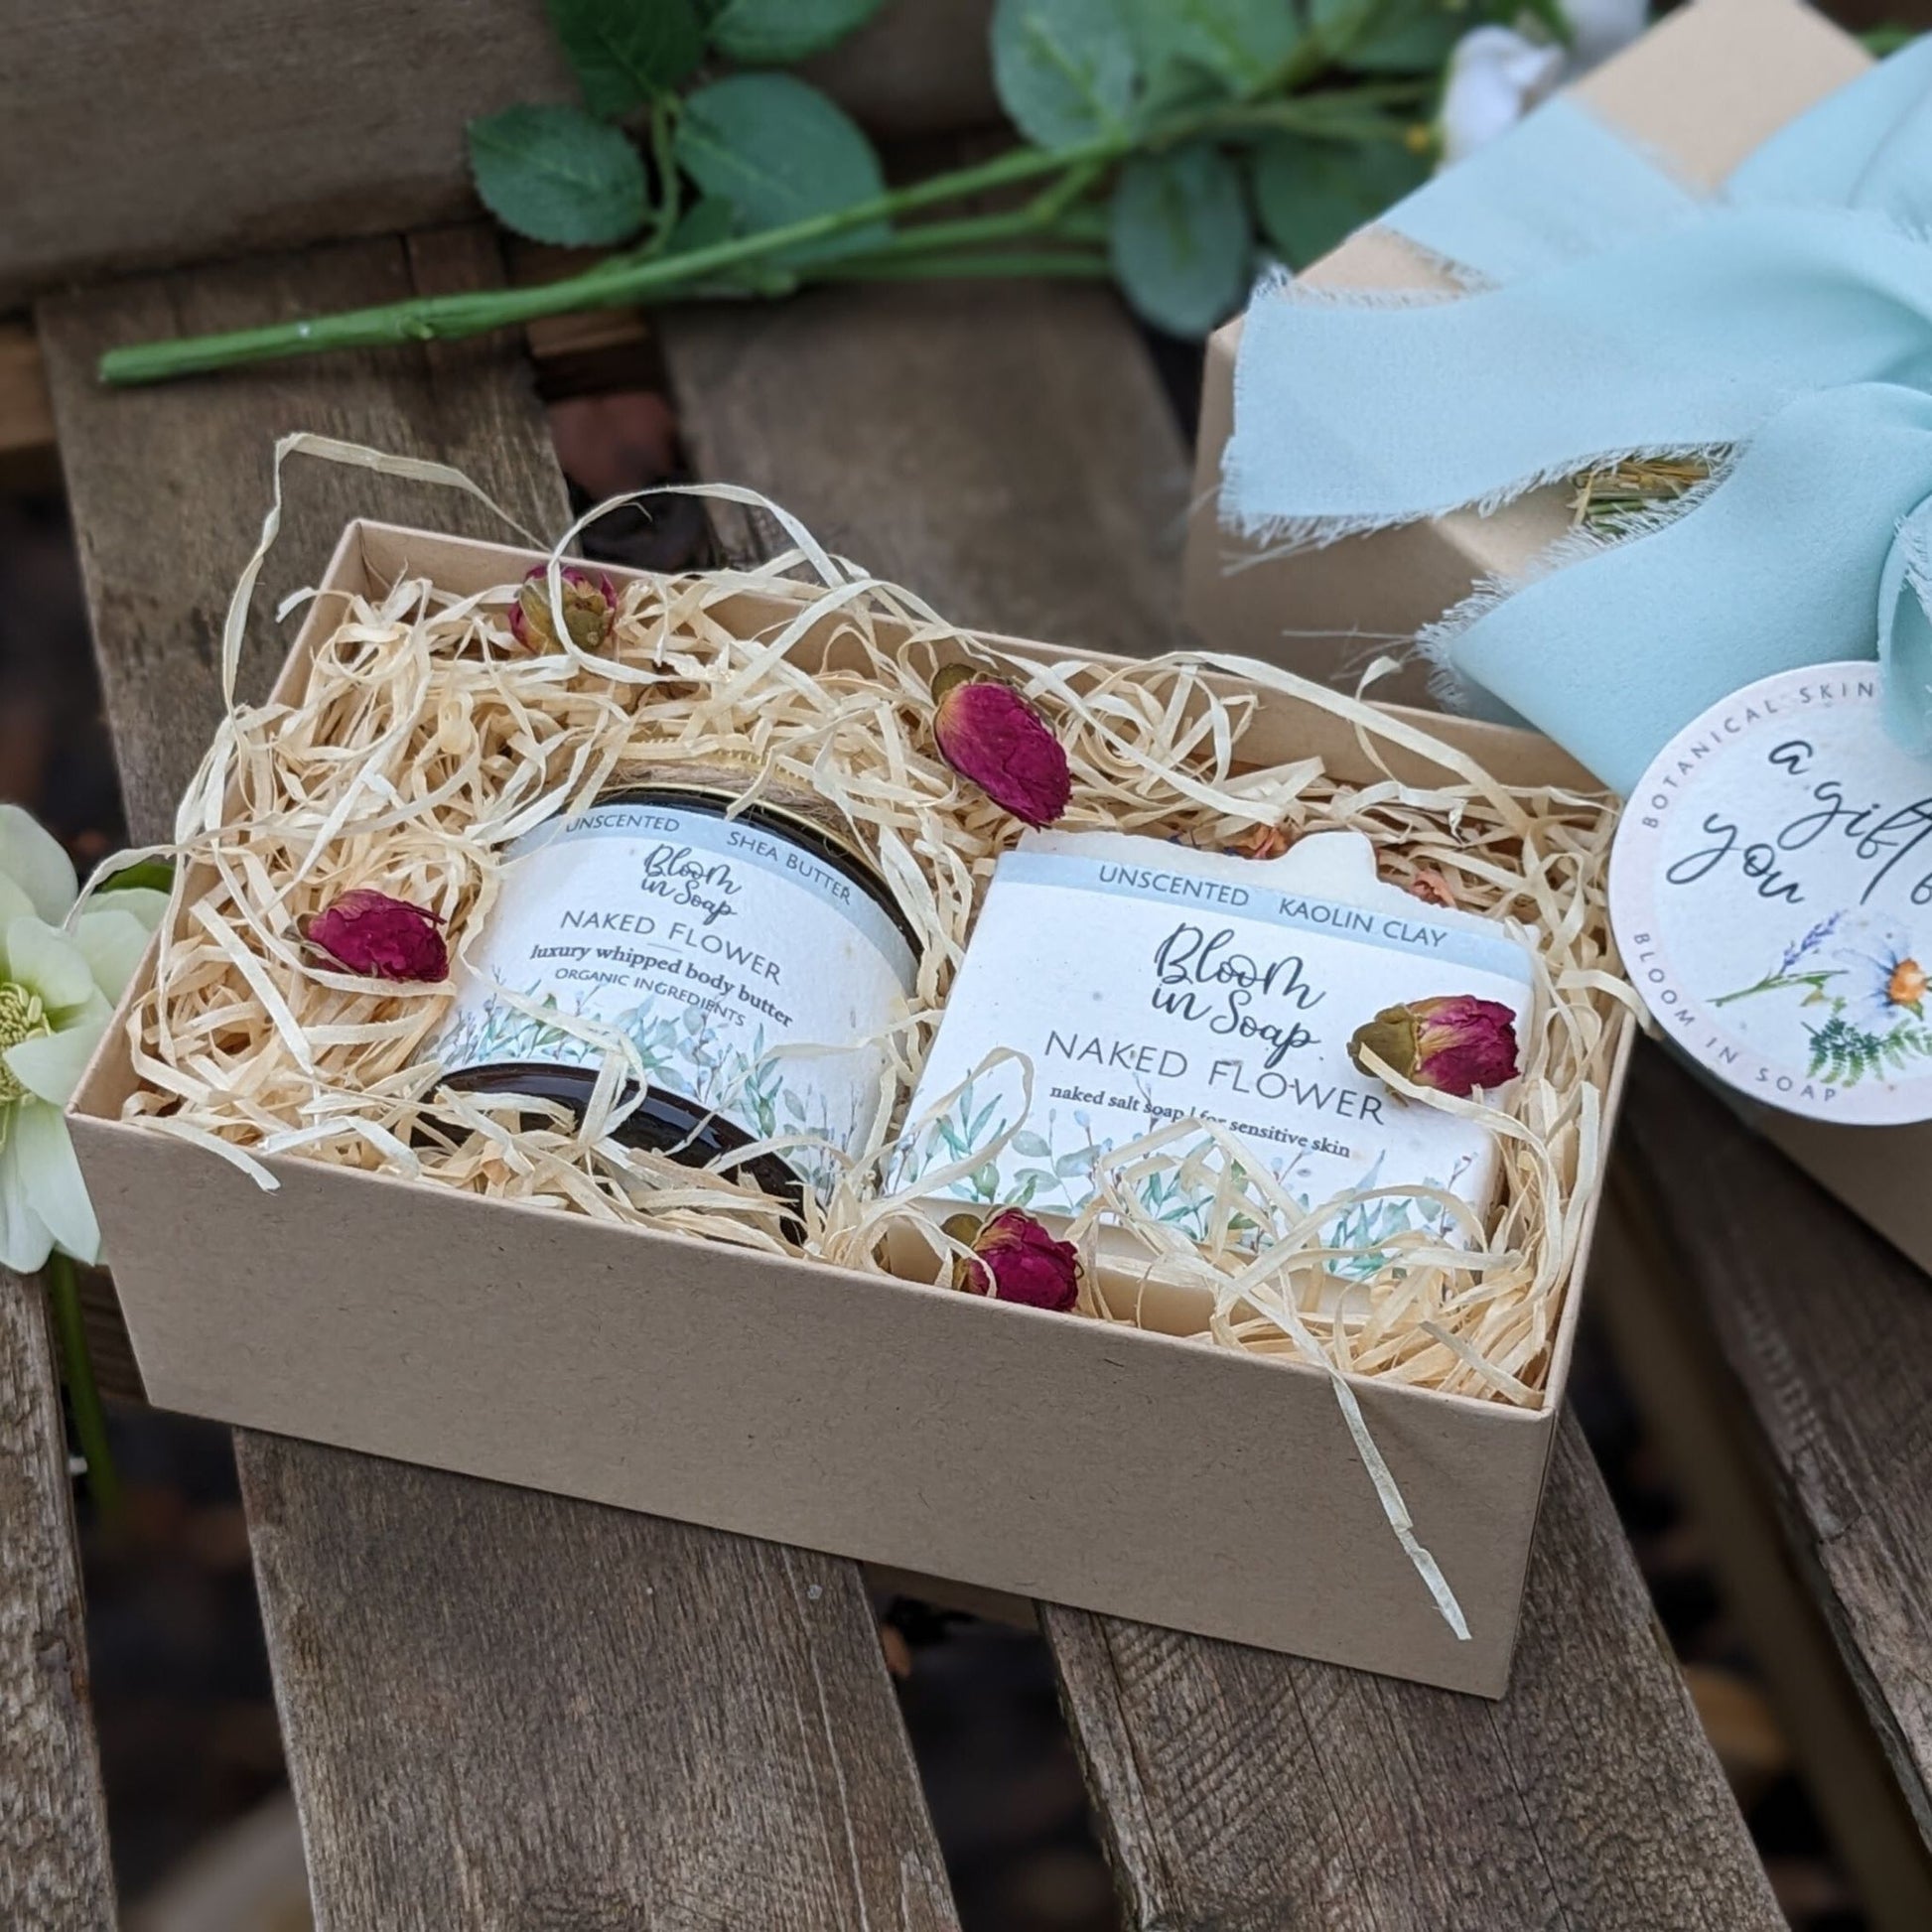 Body Butter Gift Set with Naked Flower